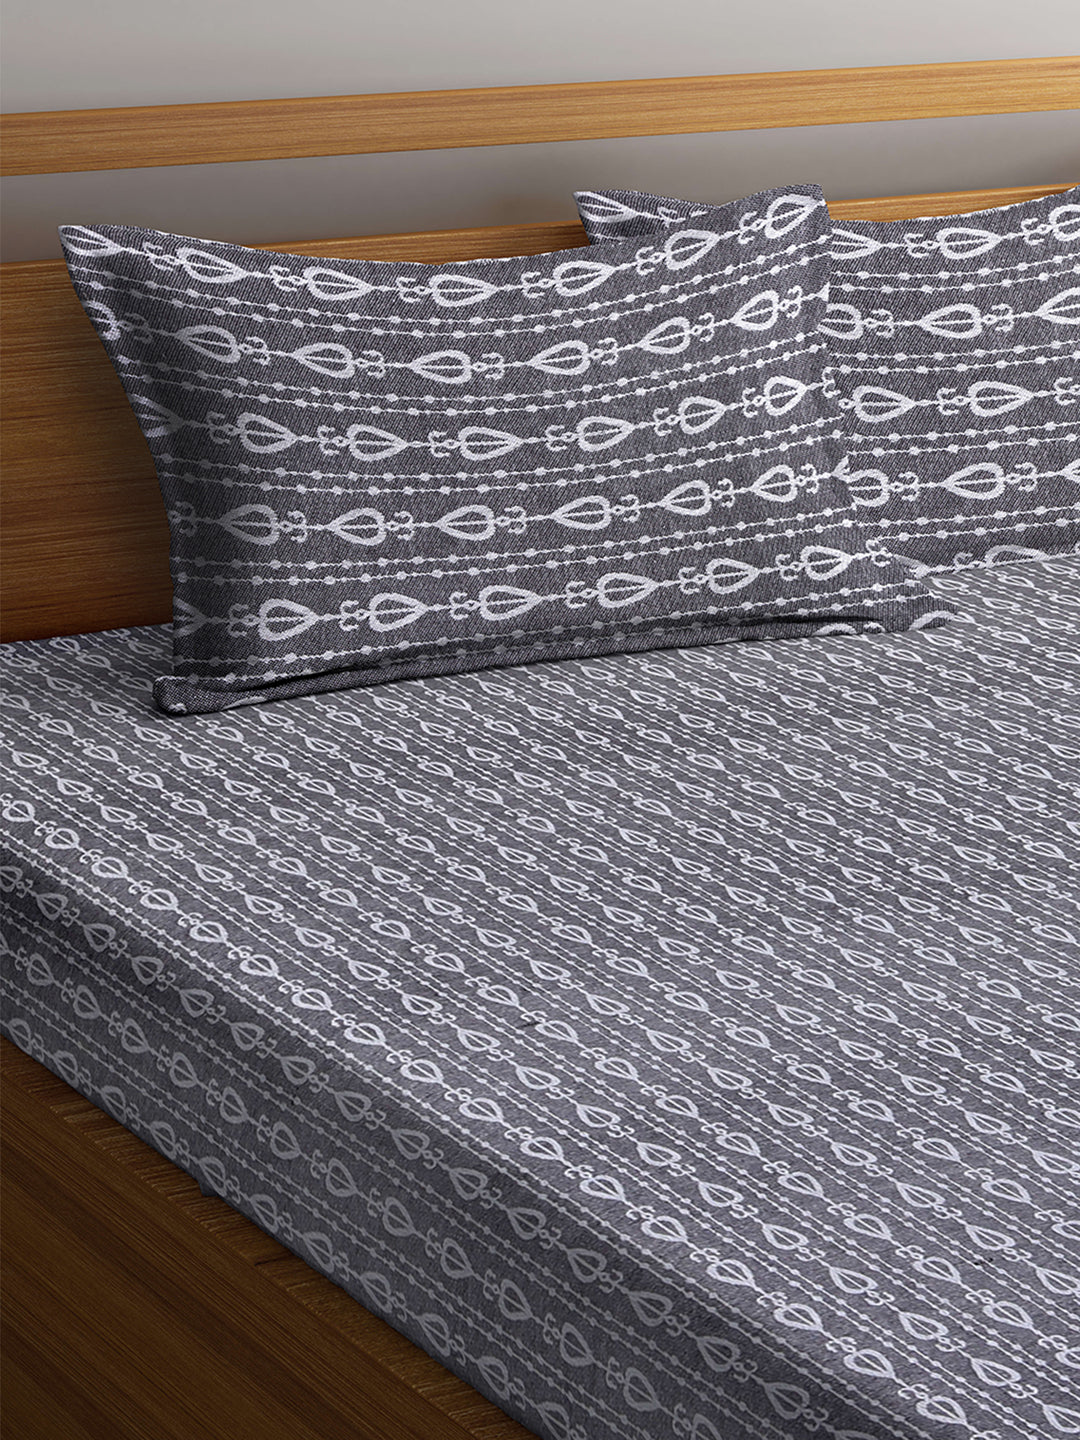 Arrabi Grey Ethnic Handwoven Cotton Double King Size Bedsheet with 2 Pillow Covers (270 x 270 cm)